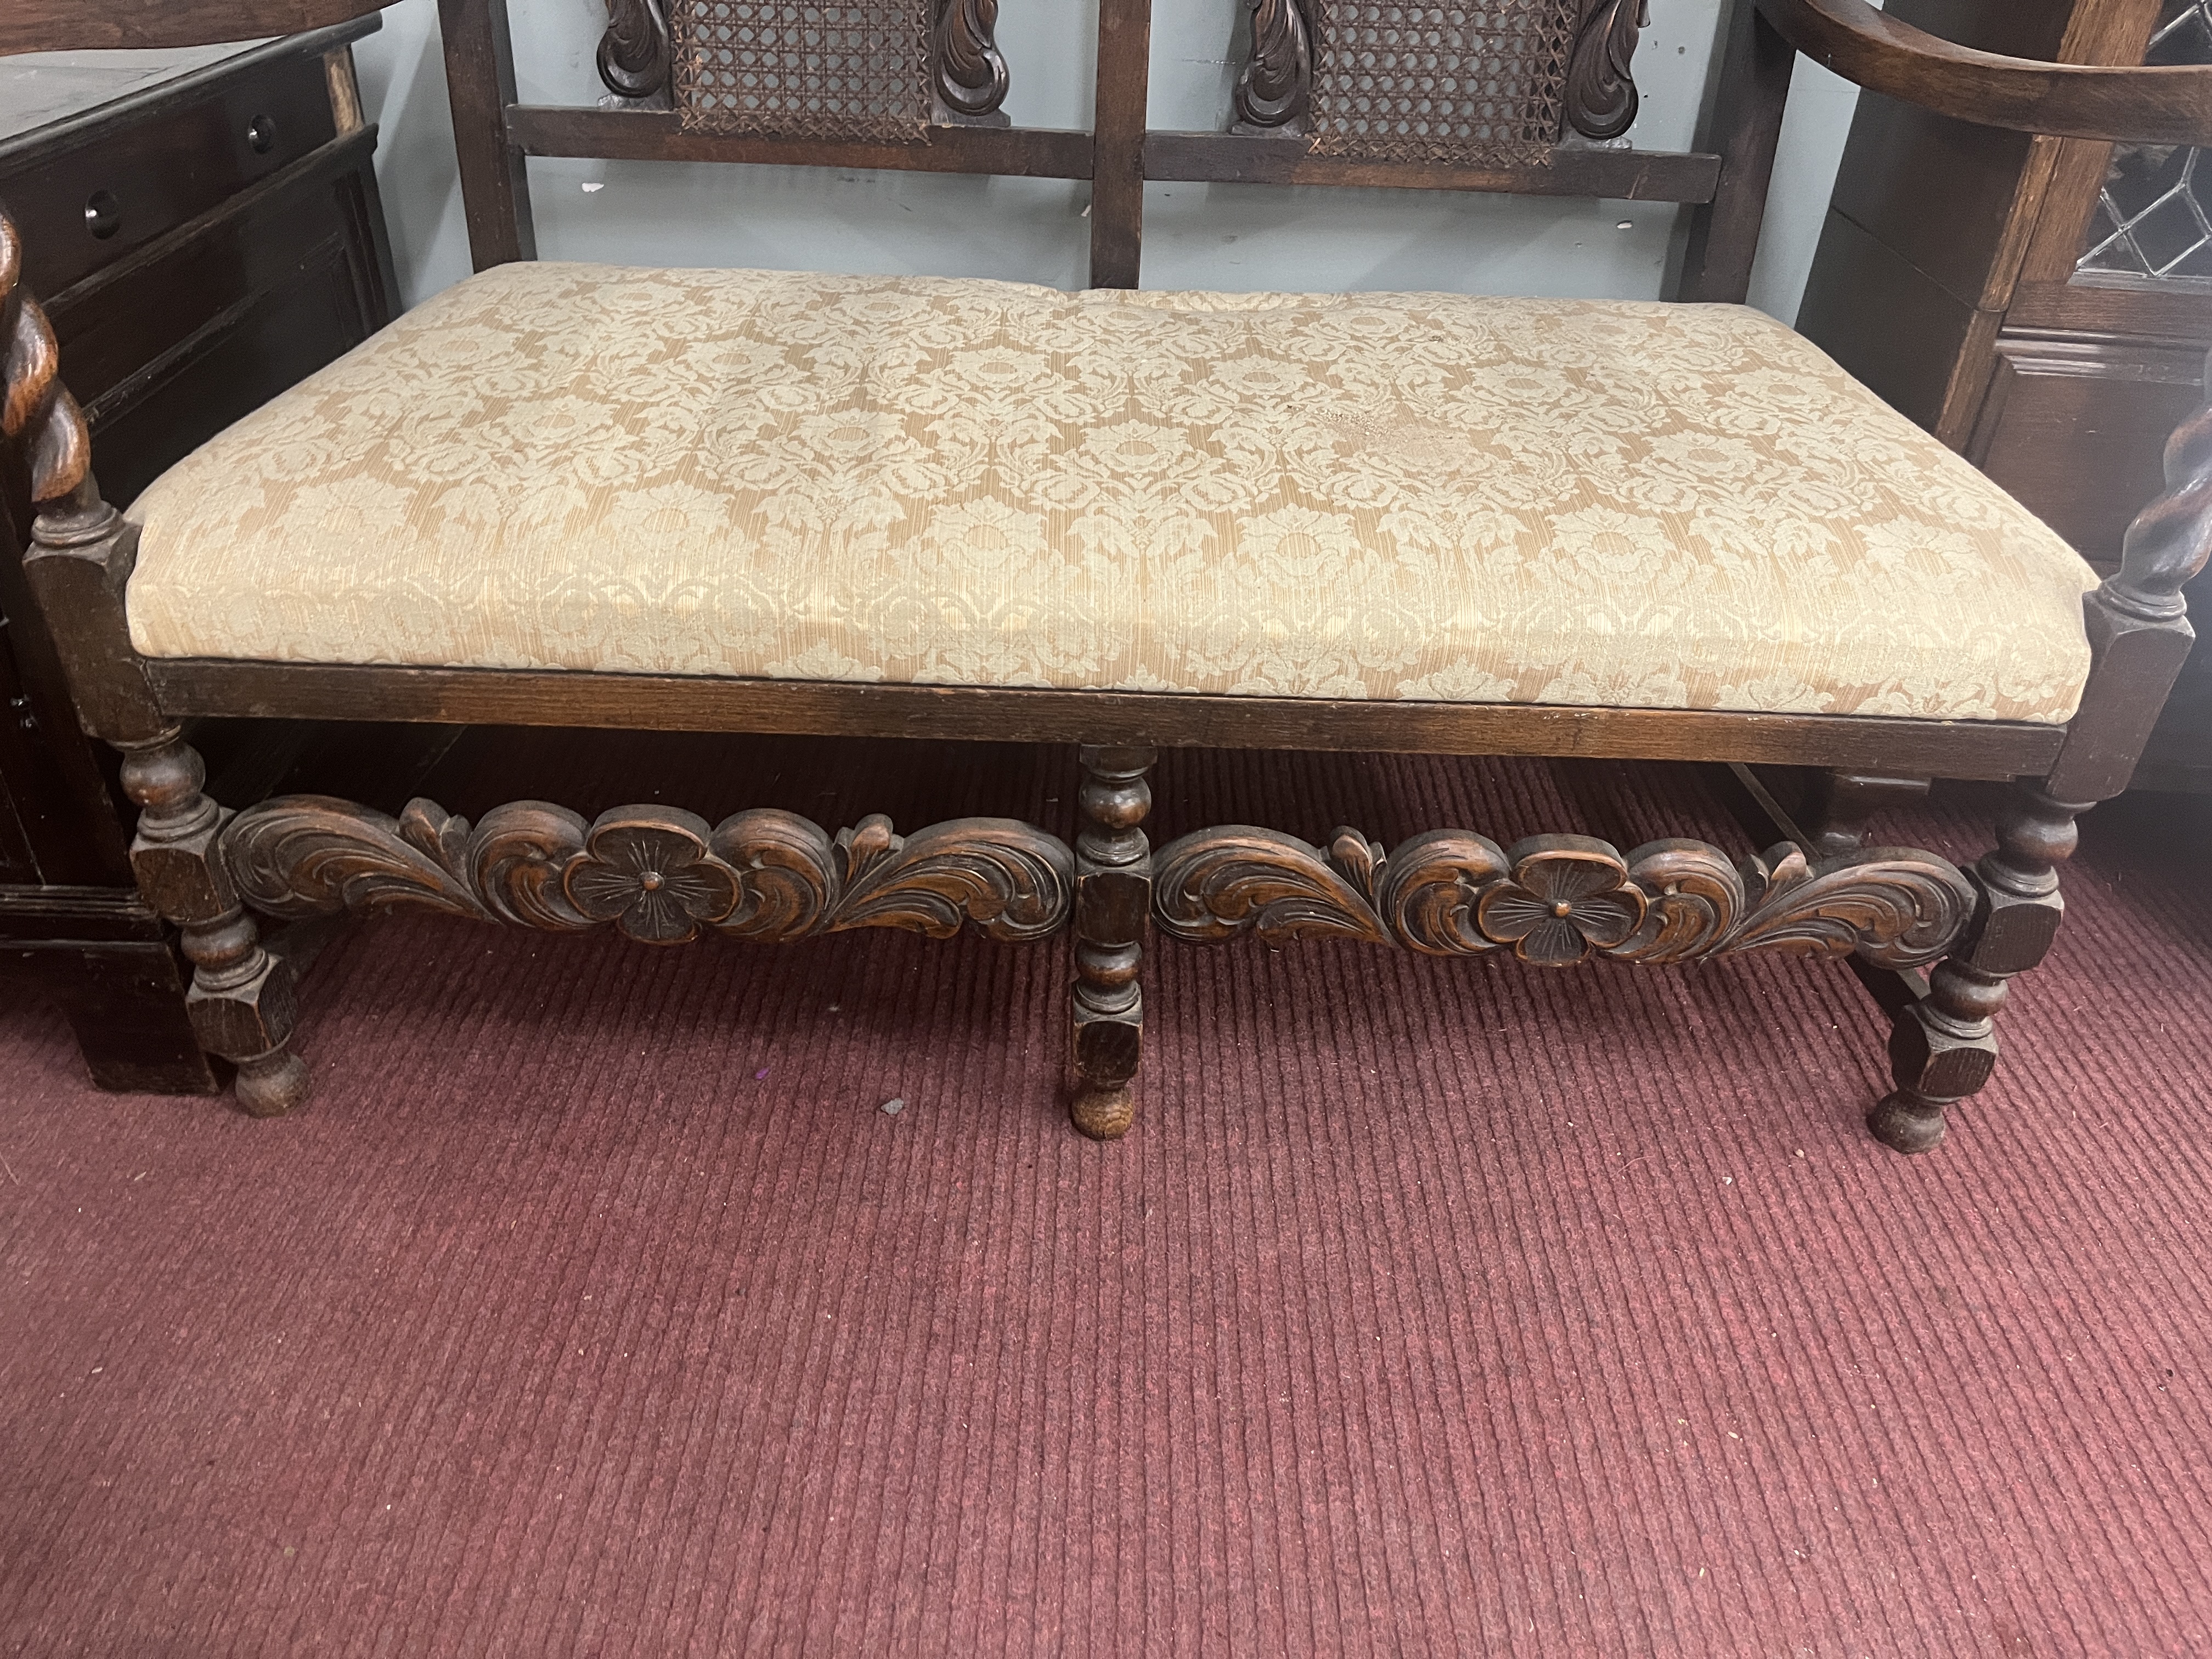 Late 19th to early 20th century Jacobean style carved rail hall bench with bergère back - Image 4 of 4